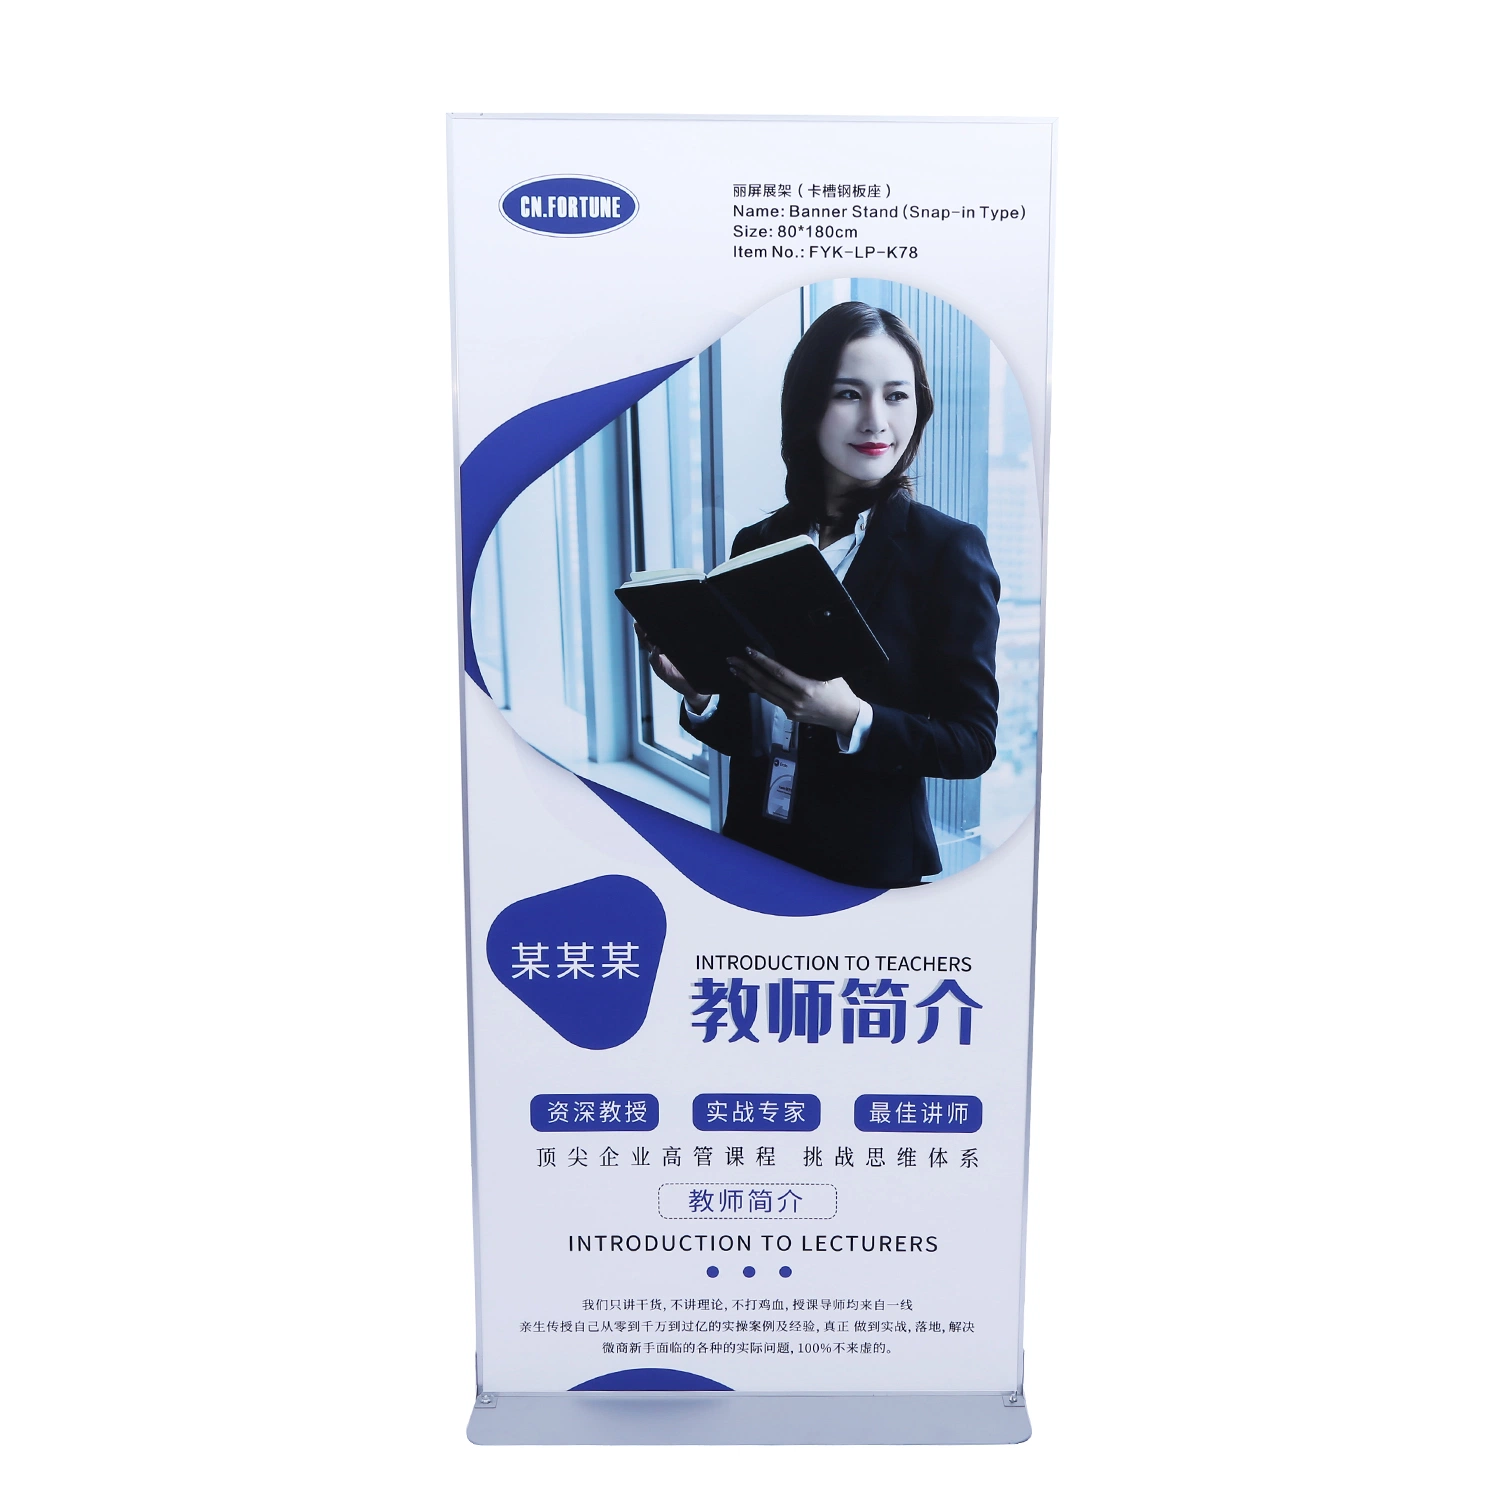 Snap-in Type Banner Stand Exhibition Stand for Display Stand Promotion